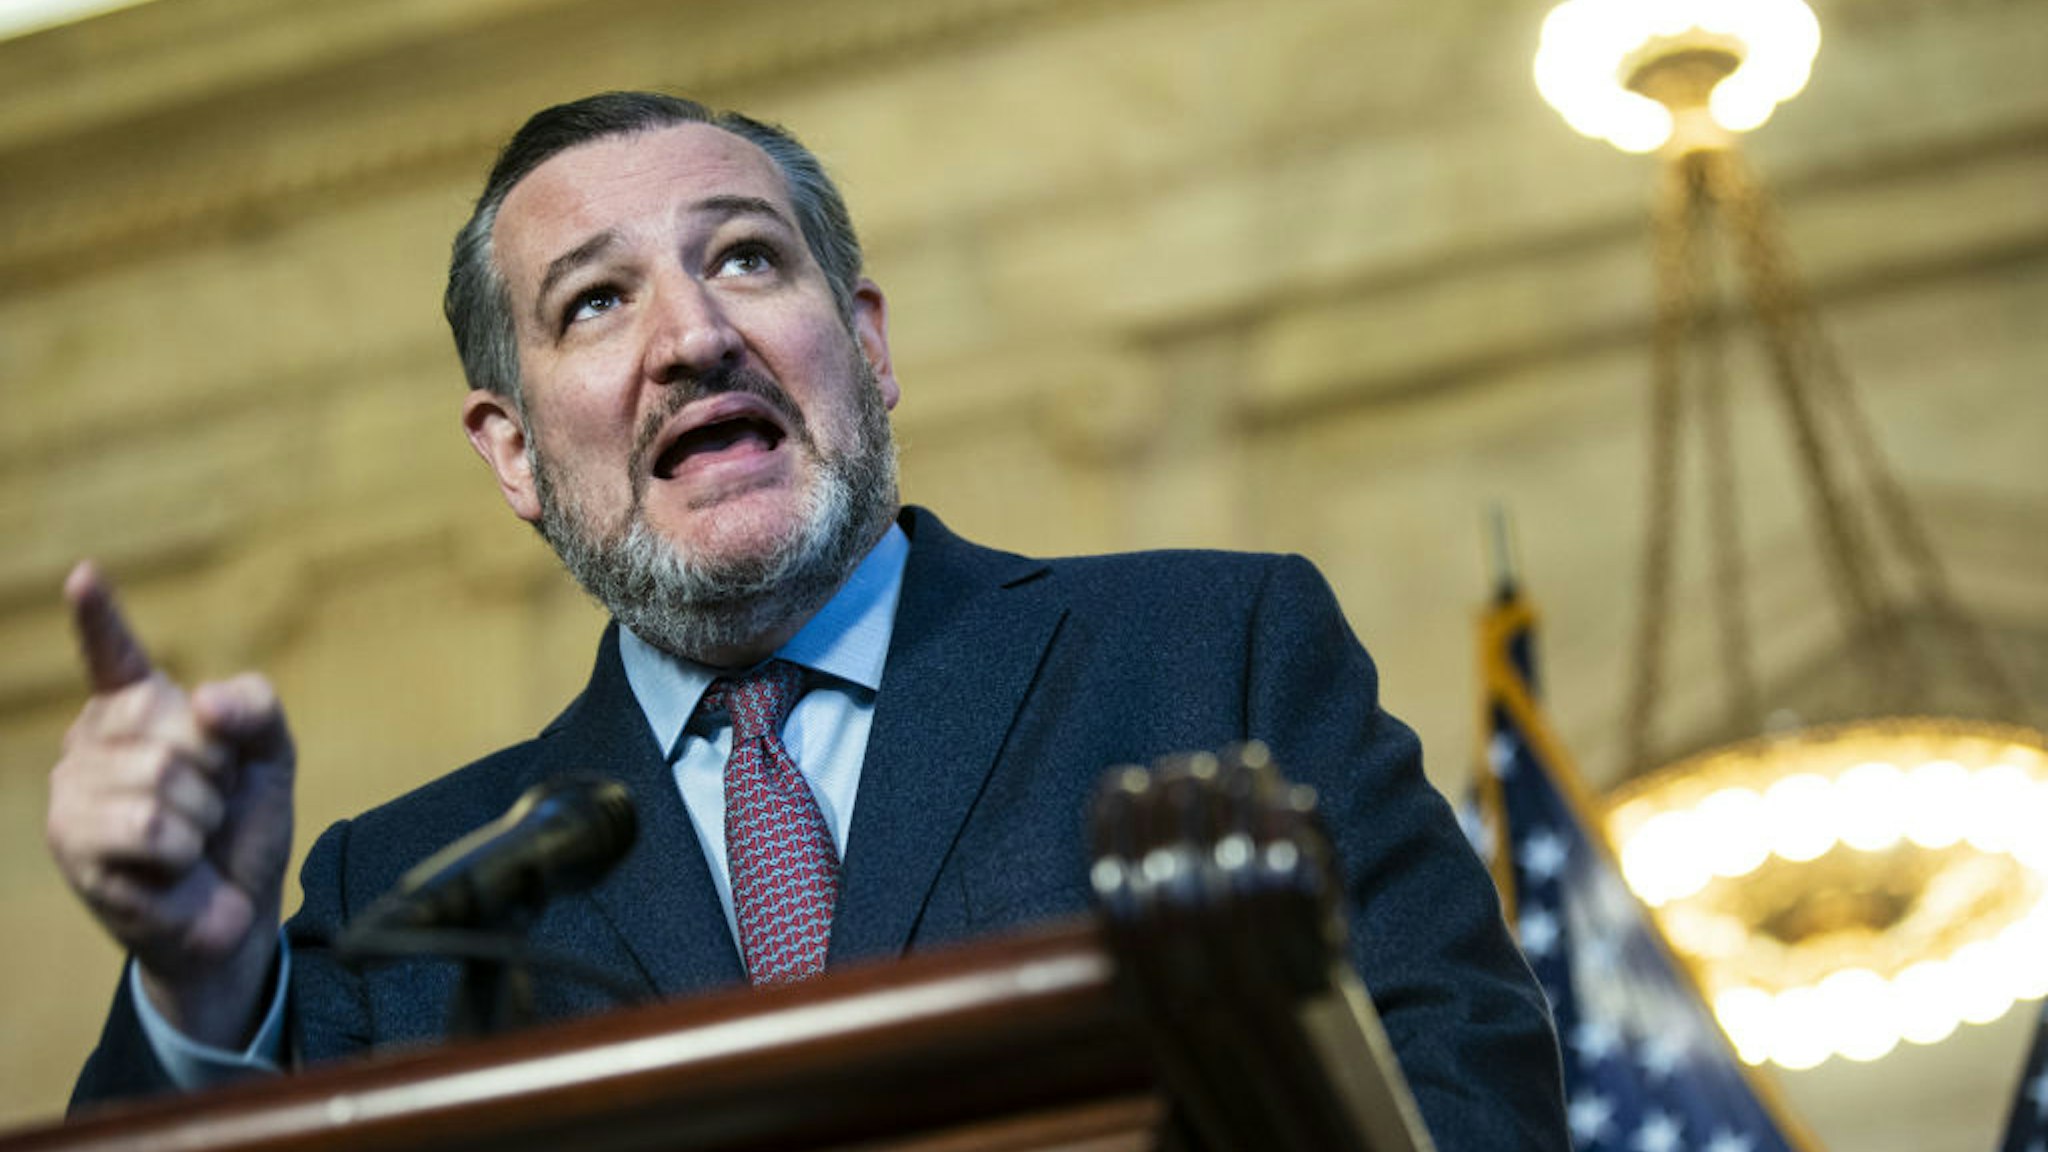 Senator Ted Cruz, a Republican from Texas, speaks during a Republican news conference on Capitol Hill in Washington, D.C., U.S., on Tuesday, Jan. 11, 2022.